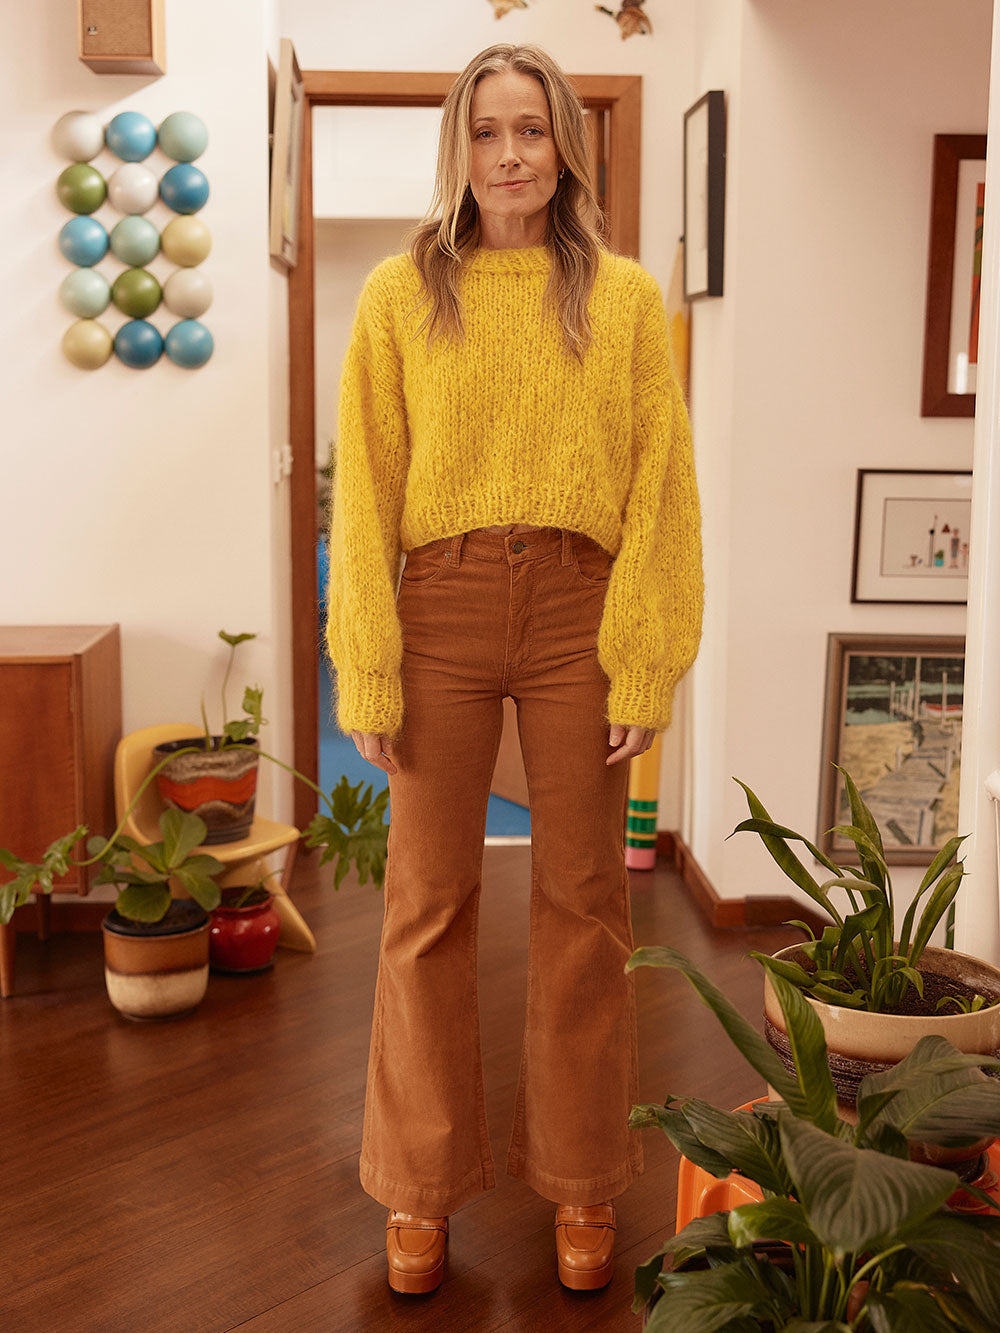 Woman stands in hallway wearing a bright yellow chunky knitted mohair jumper and brown cord jeans. 